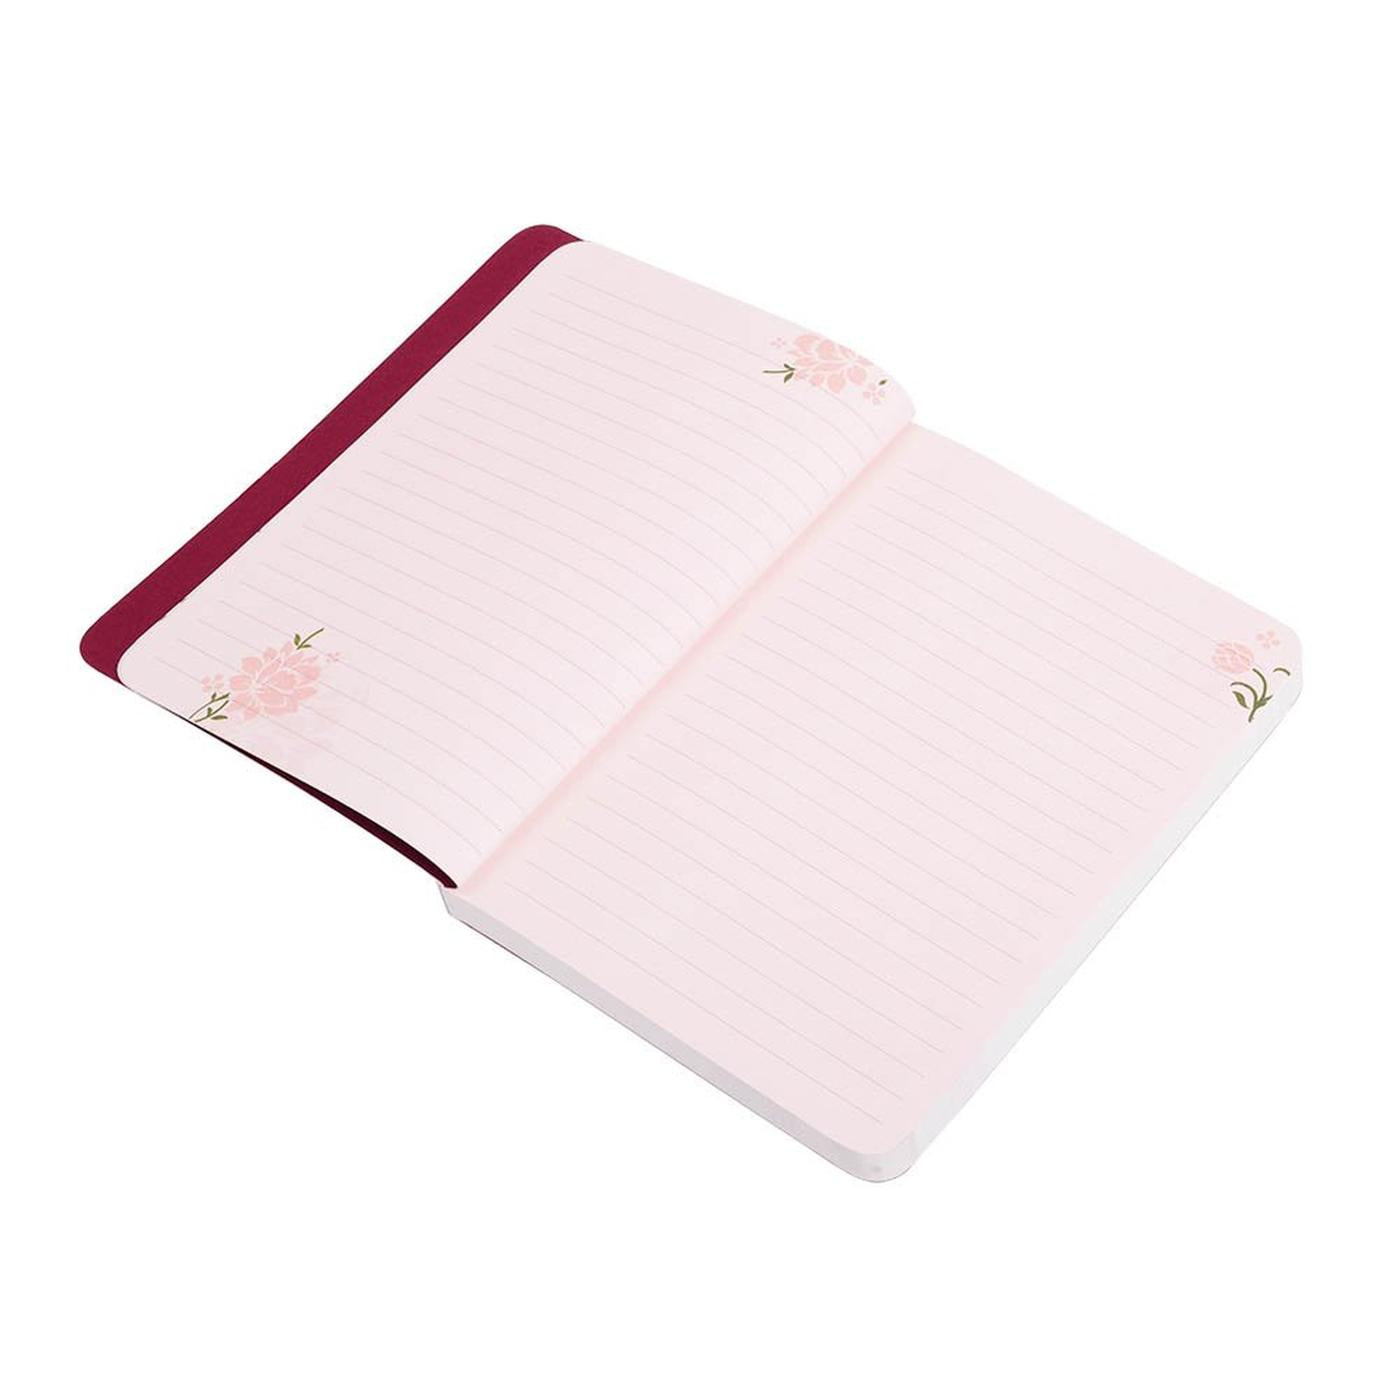 Initial G - Floral Monogram Notebook